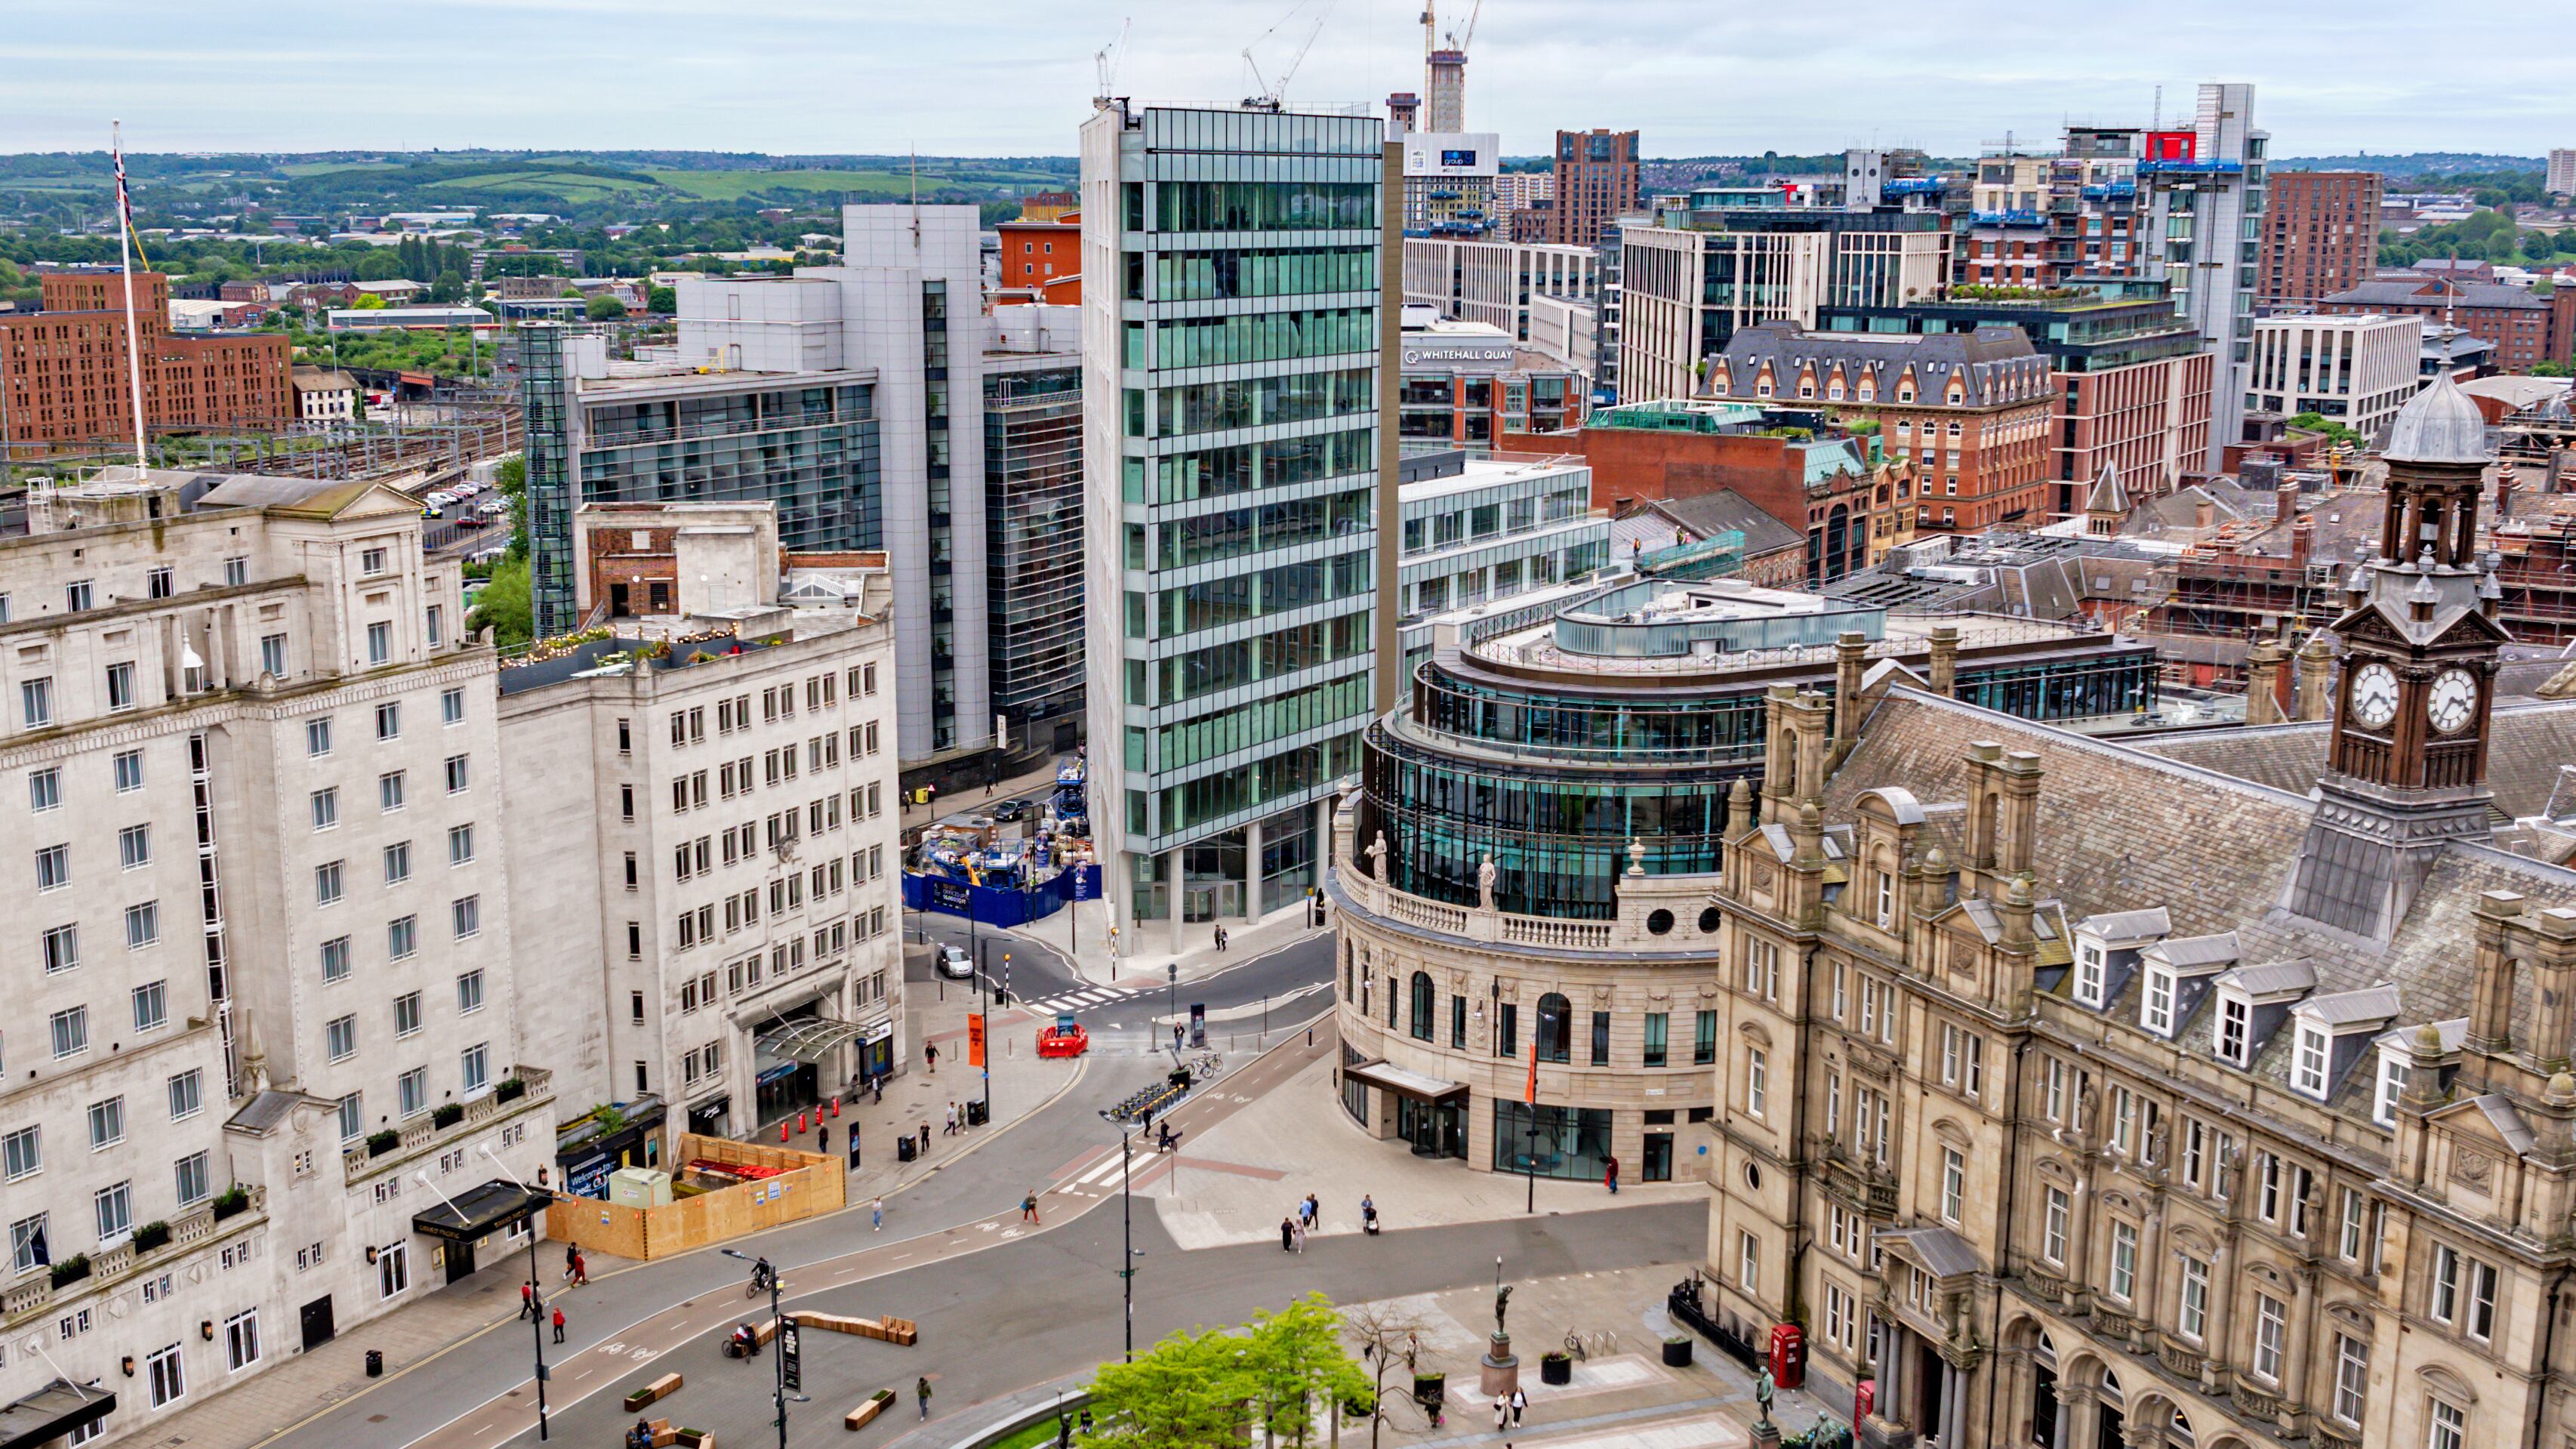 The 12 storey City Square House is located close to Leeds’ main rail station.